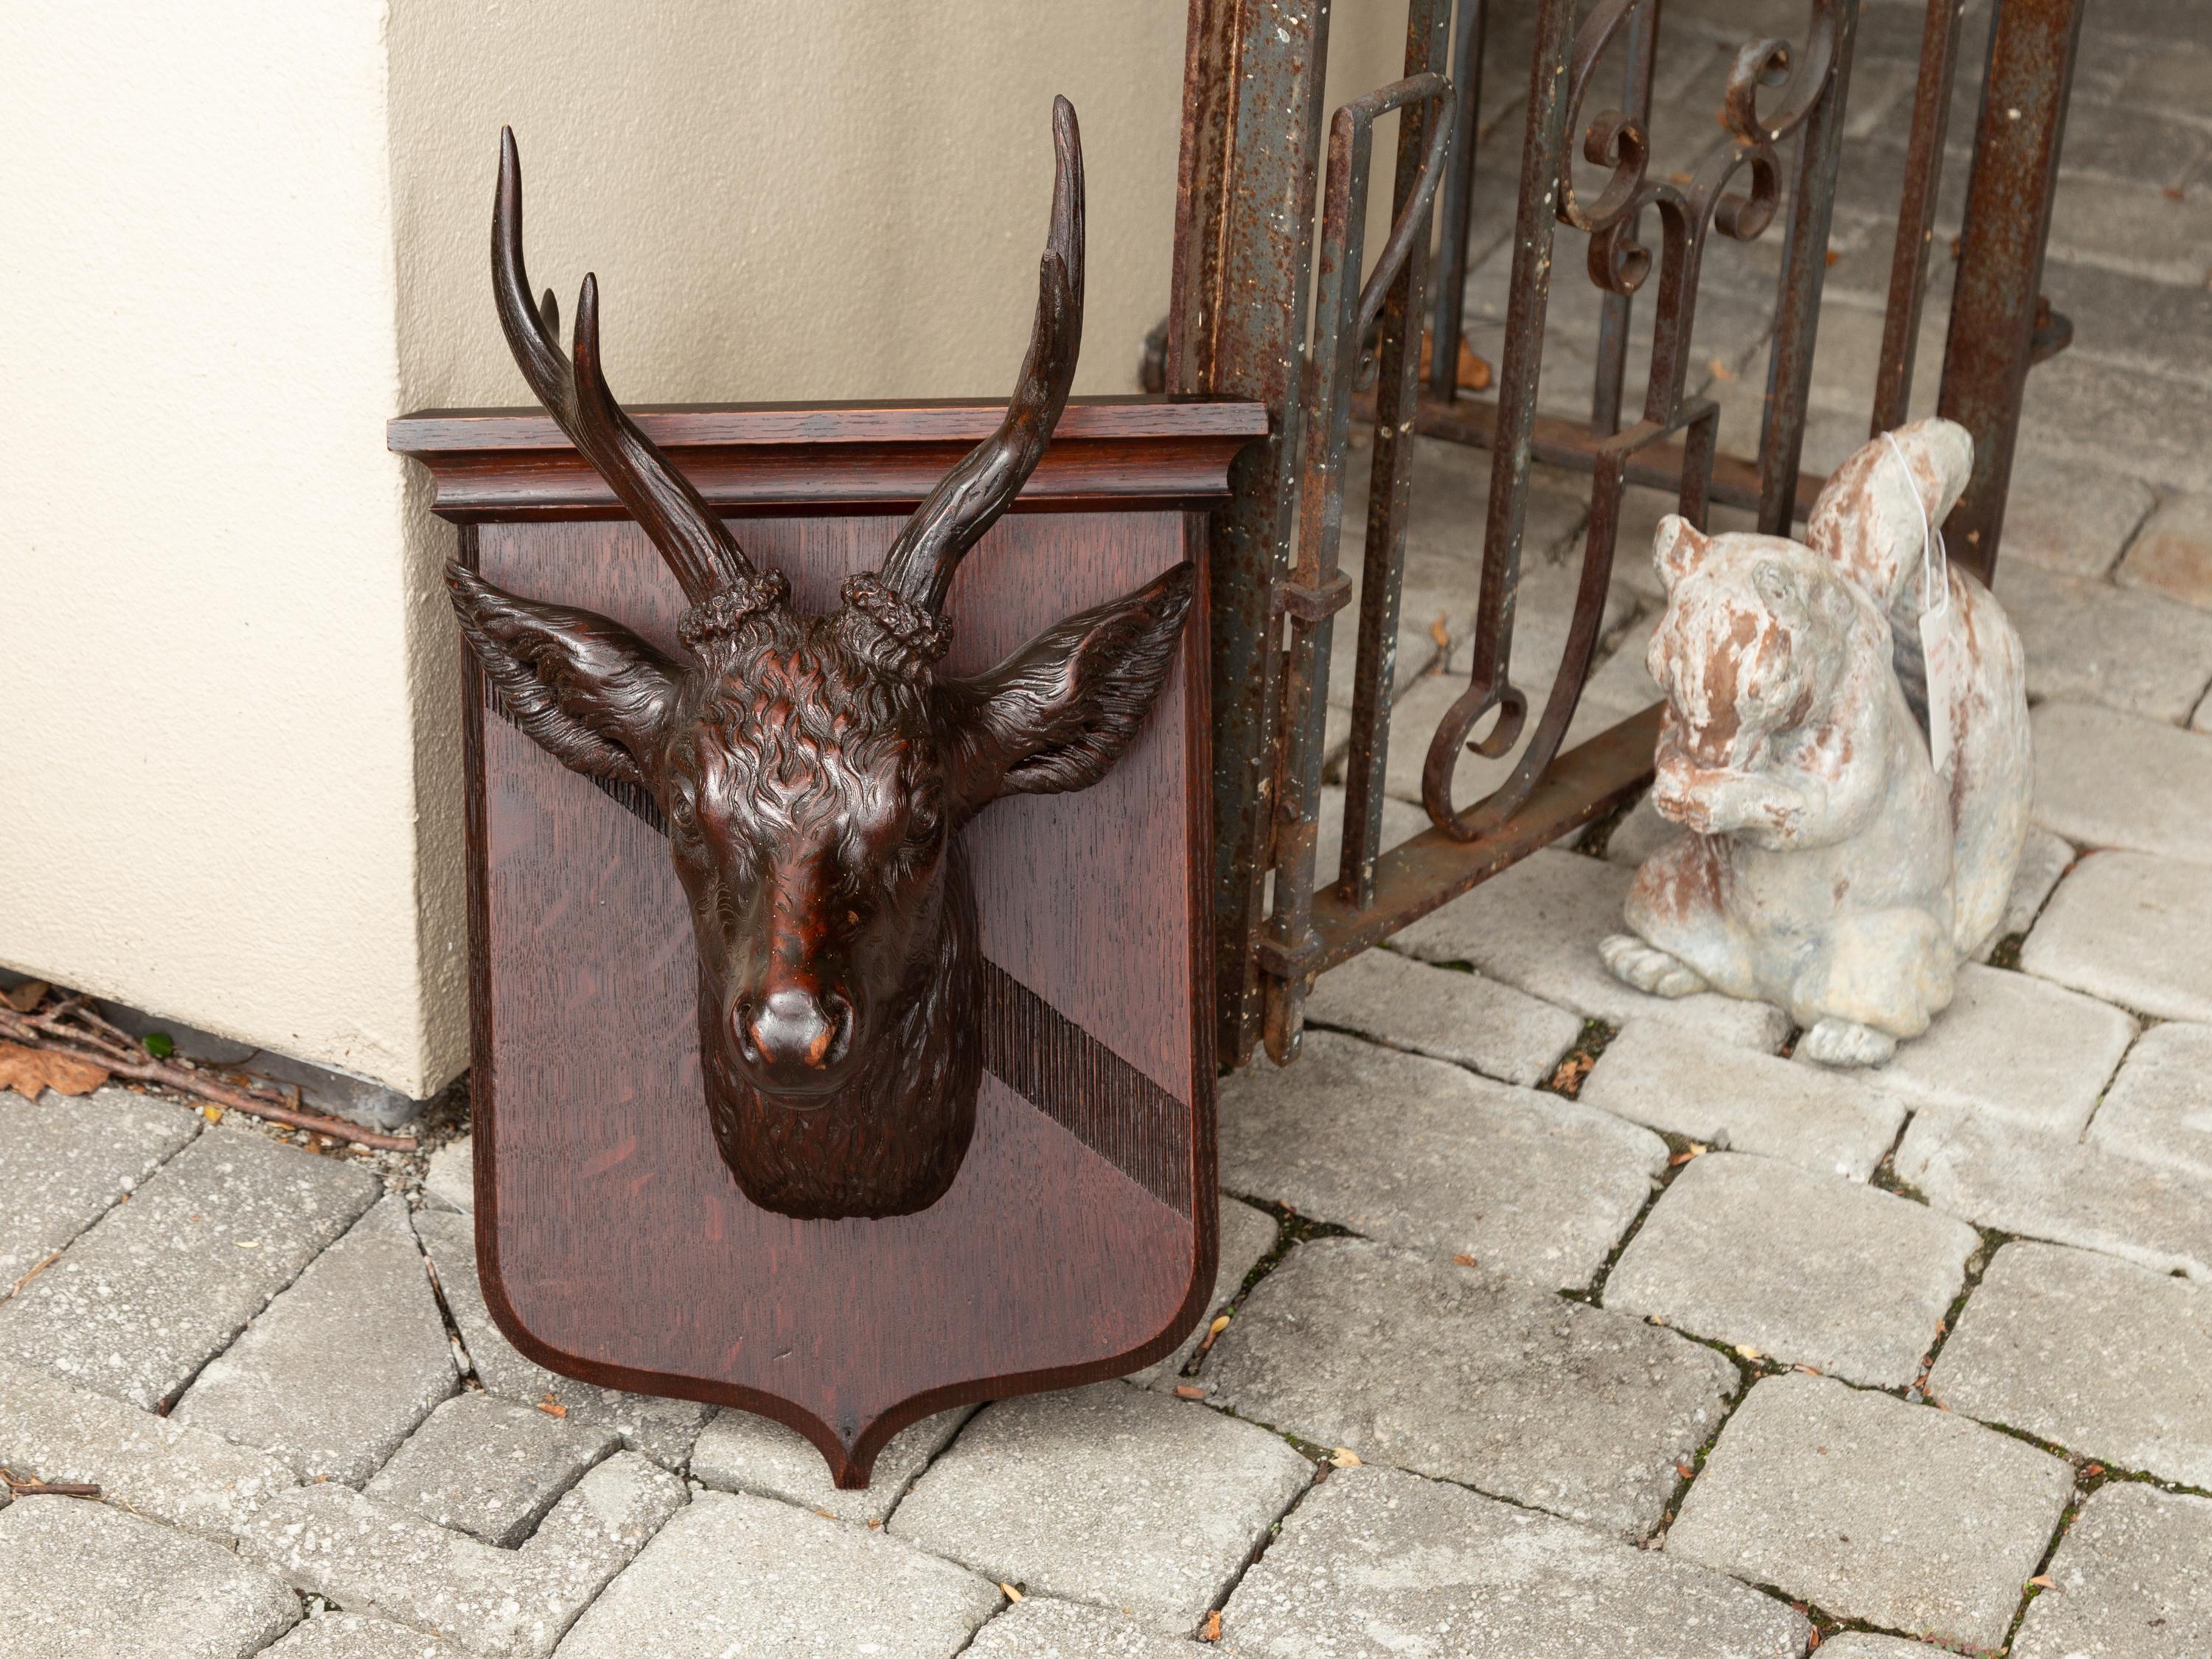 A Swiss Black Forest hand carved wooden buck head wall sculpture from the turn of the century, with shield plate. Born in the early years of the 20th century, this exquisite wall sculpture depicts a carved buck mounted on a shield-shaped plate. Our